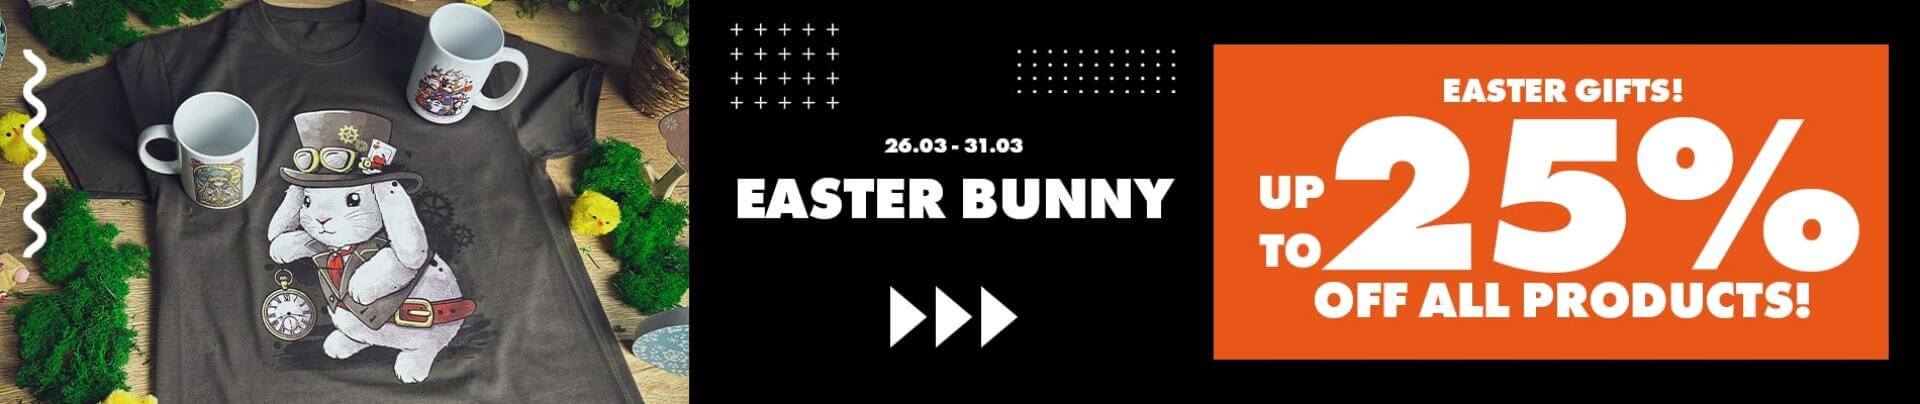 EASTER BUNNY up to 25% OFF ALL PRODUCTS